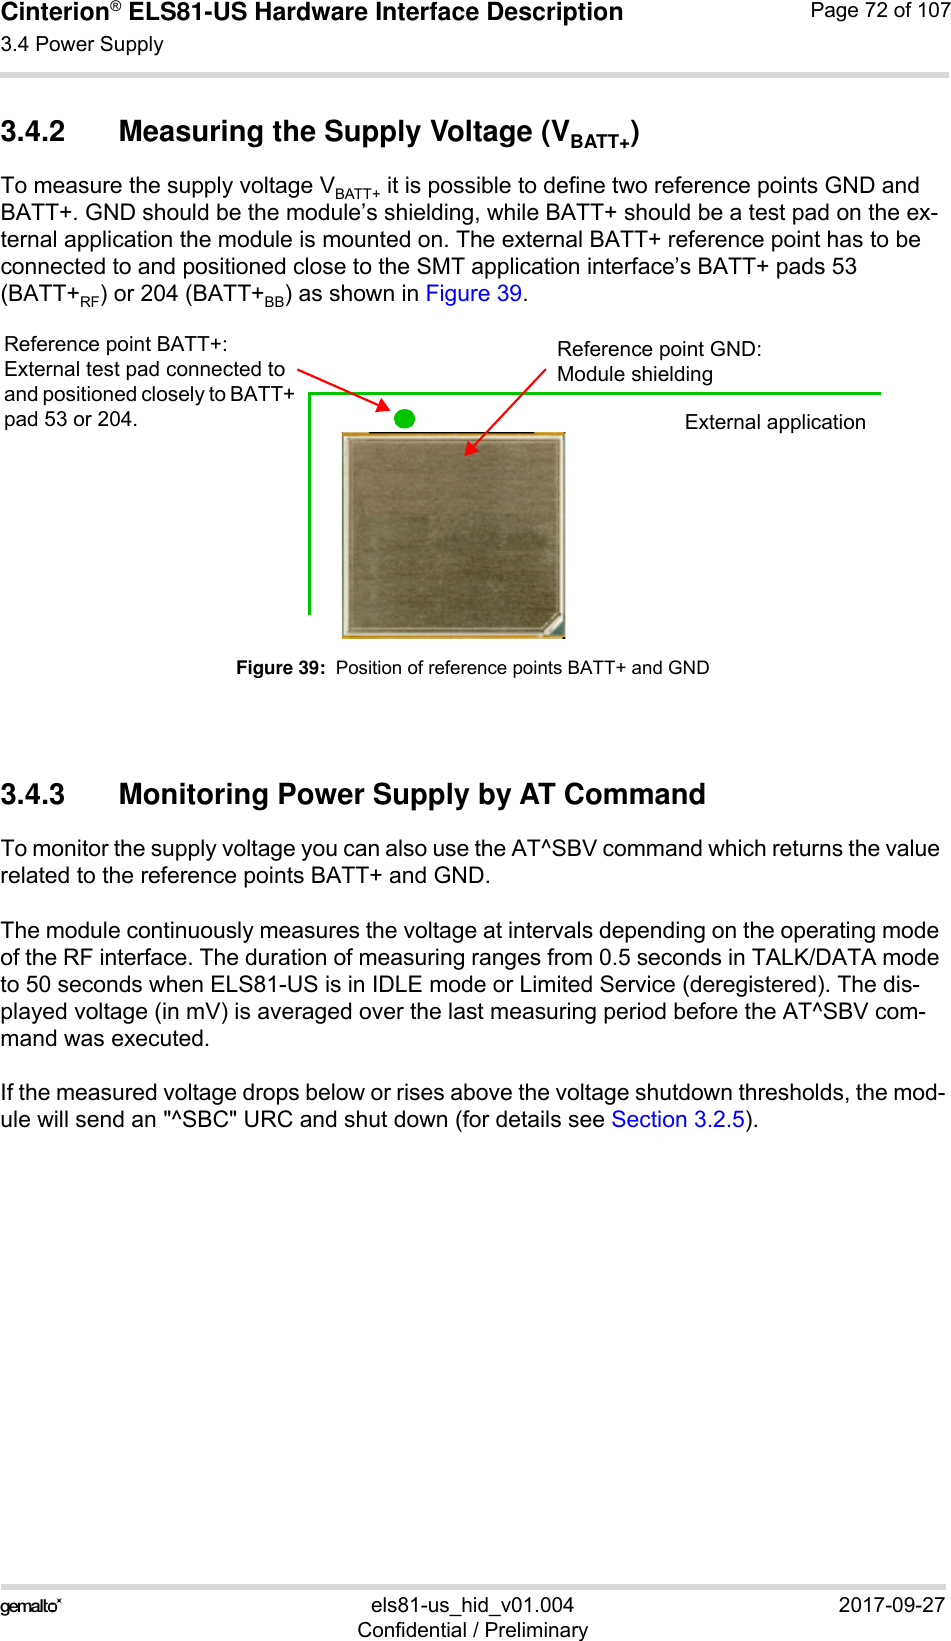 Cinterion® ELS81-US Hardware Interface Description3.4 Power Supply77els81-us_hid_v01.004 2017-09-27Confidential / PreliminaryPage 72 of 1073.4.2 Measuring the Supply Voltage (VBATT+)To measure the supply voltage VBATT+ it is possible to define two reference points GND and BATT+. GND should be the module’s shielding, while BATT+ should be a test pad on the ex-ternal application the module is mounted on. The external BATT+ reference point has to be connected to and positioned close to the SMT application interface’s BATT+ pads 53 (BATT+RF) or 204 (BATT+BB) as shown in Figure 39.Figure 39:  Position of reference points BATT+ and GND3.4.3 Monitoring Power Supply by AT CommandTo monitor the supply voltage you can also use the AT^SBV command which returns the value related to the reference points BATT+ and GND. The module continuously measures the voltage at intervals depending on the operating mode of the RF interface. The duration of measuring ranges from 0.5 seconds in TALK/DATA mode to 50 seconds when ELS81-US is in IDLE mode or Limited Service (deregistered). The dis-played voltage (in mV) is averaged over the last measuring period before the AT^SBV com-mand was executed. If the measured voltage drops below or rises above the voltage shutdown thresholds, the mod-ule will send an &quot;^SBC&quot; URC and shut down (for details see Section 3.2.5).Reference point GND:Module shieldingReference point BATT+:External test pad connected to and positioned closely to BATT+ pad 53 or 204. External application